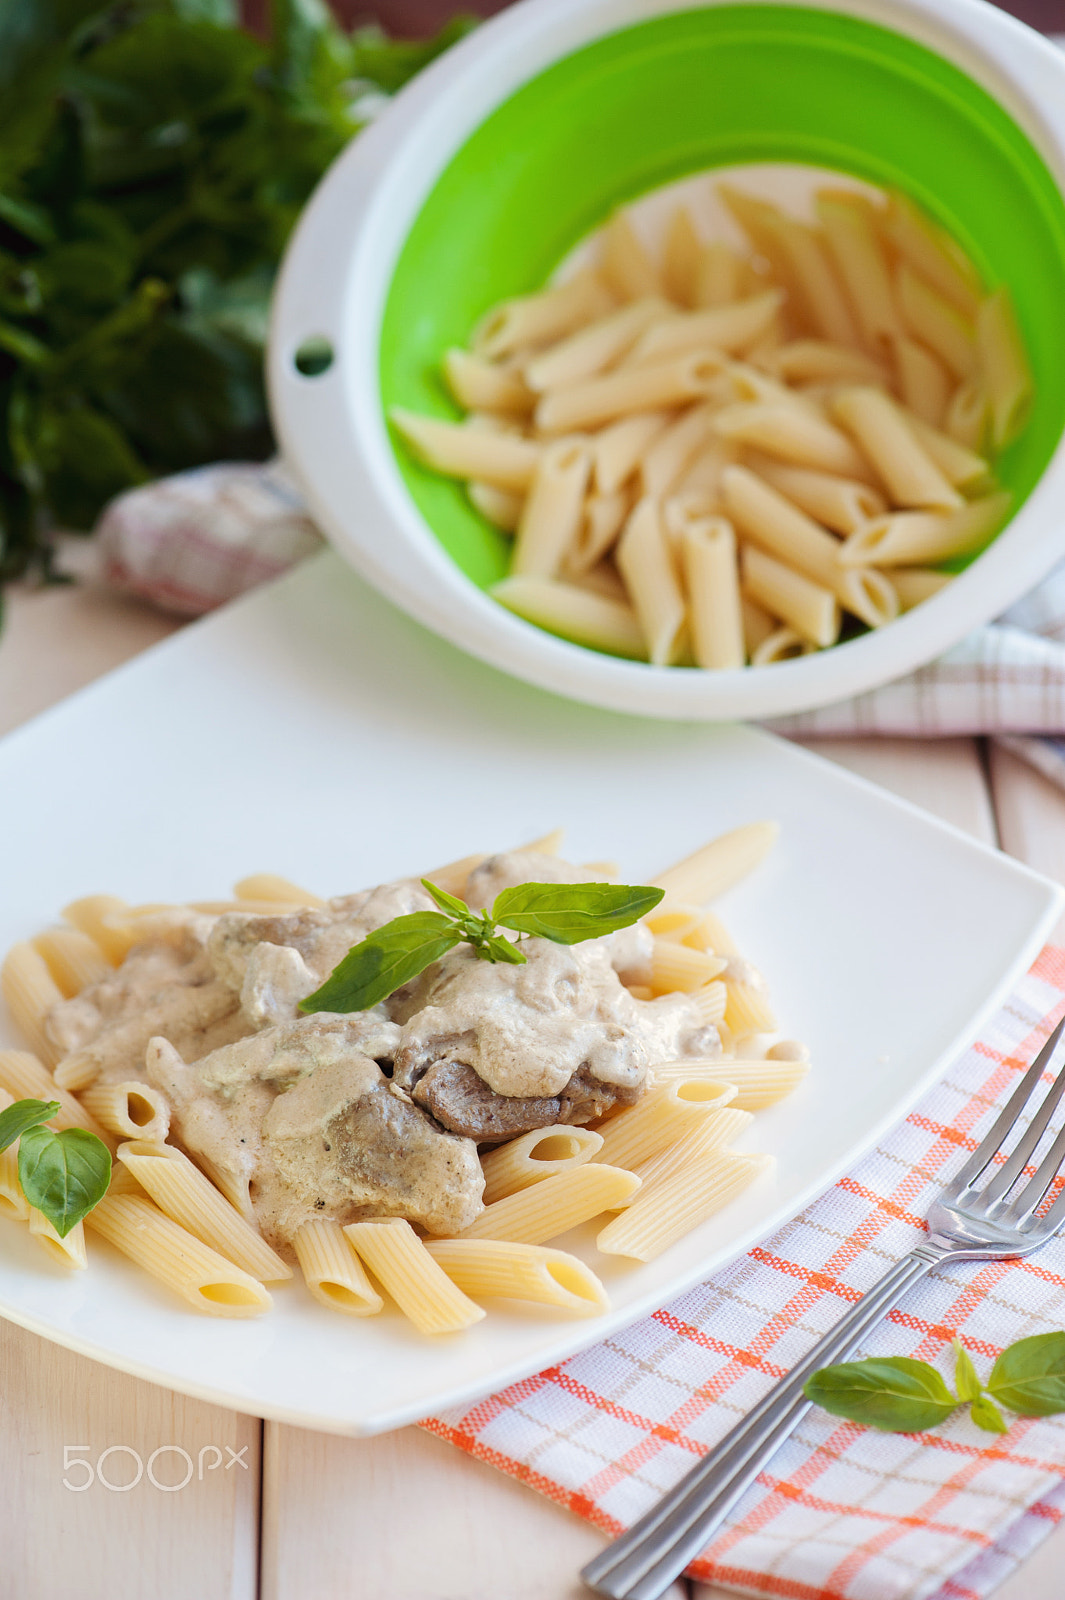 Nikon D700 + Nikon AF-S Micro-Nikkor 105mm F2.8G IF-ED VR sample photo. Penne pasta with meat and white sauce on a plate photography